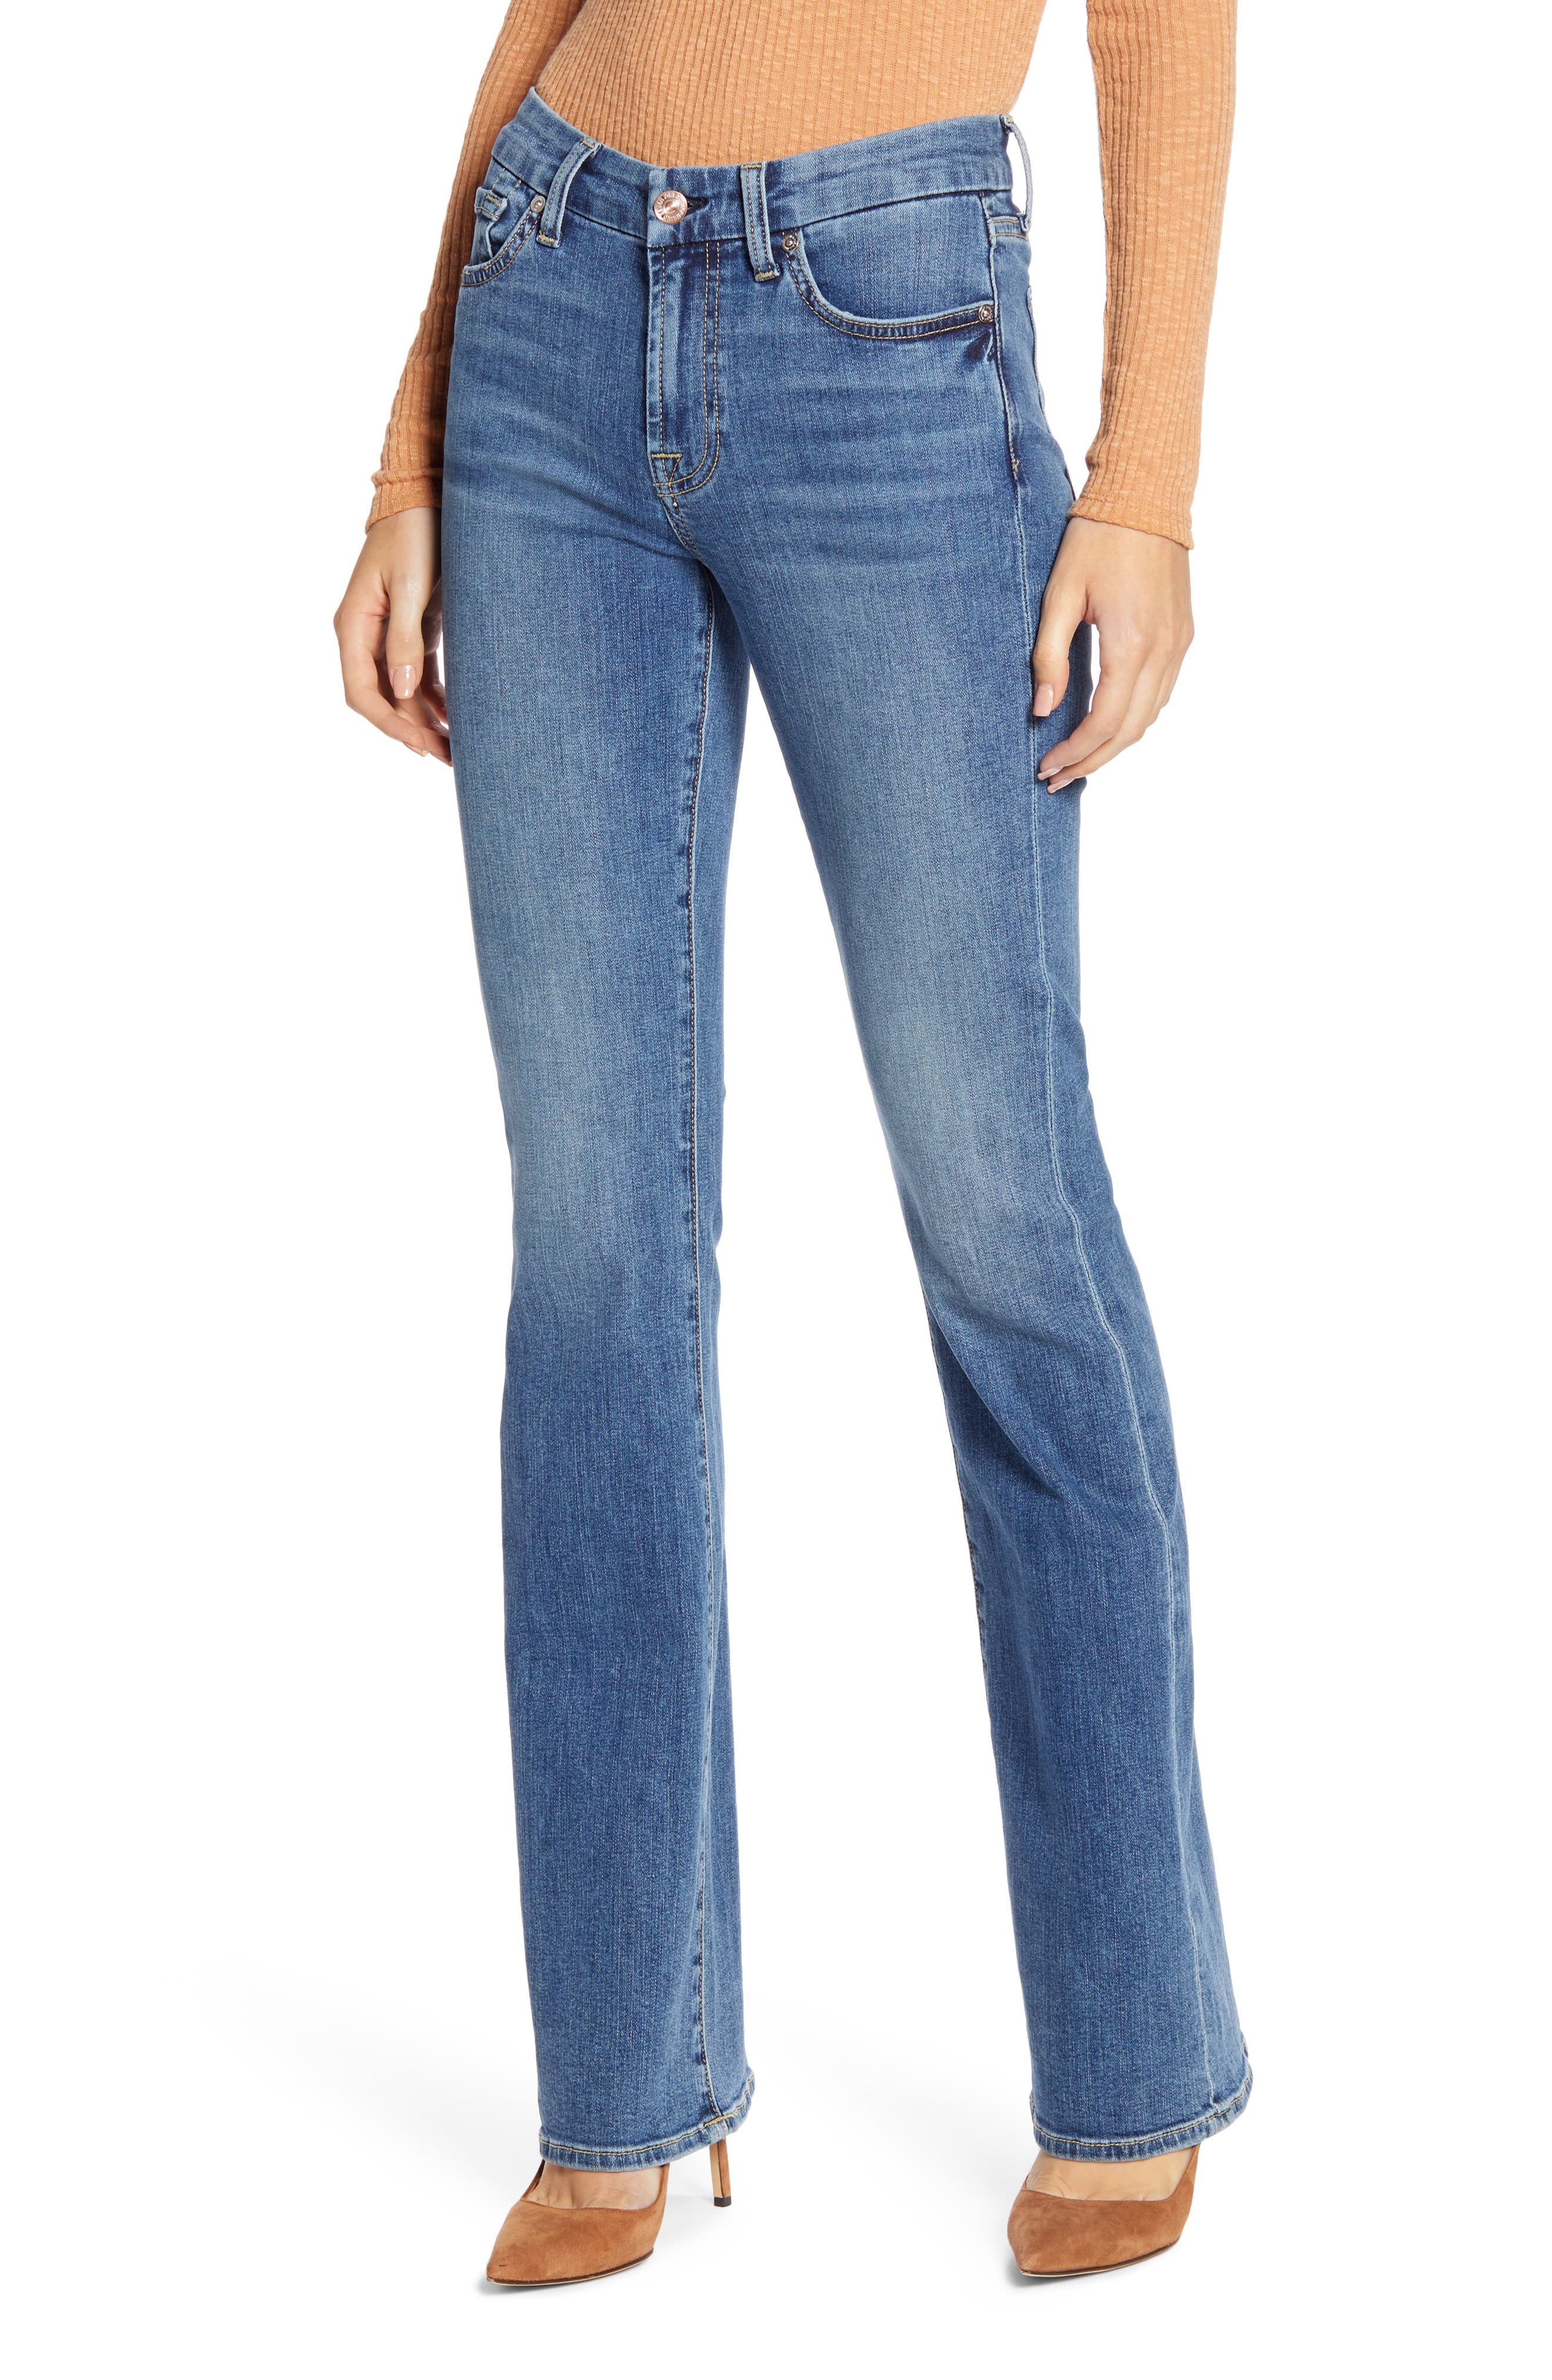 seven for all mankind kimmie bootcut